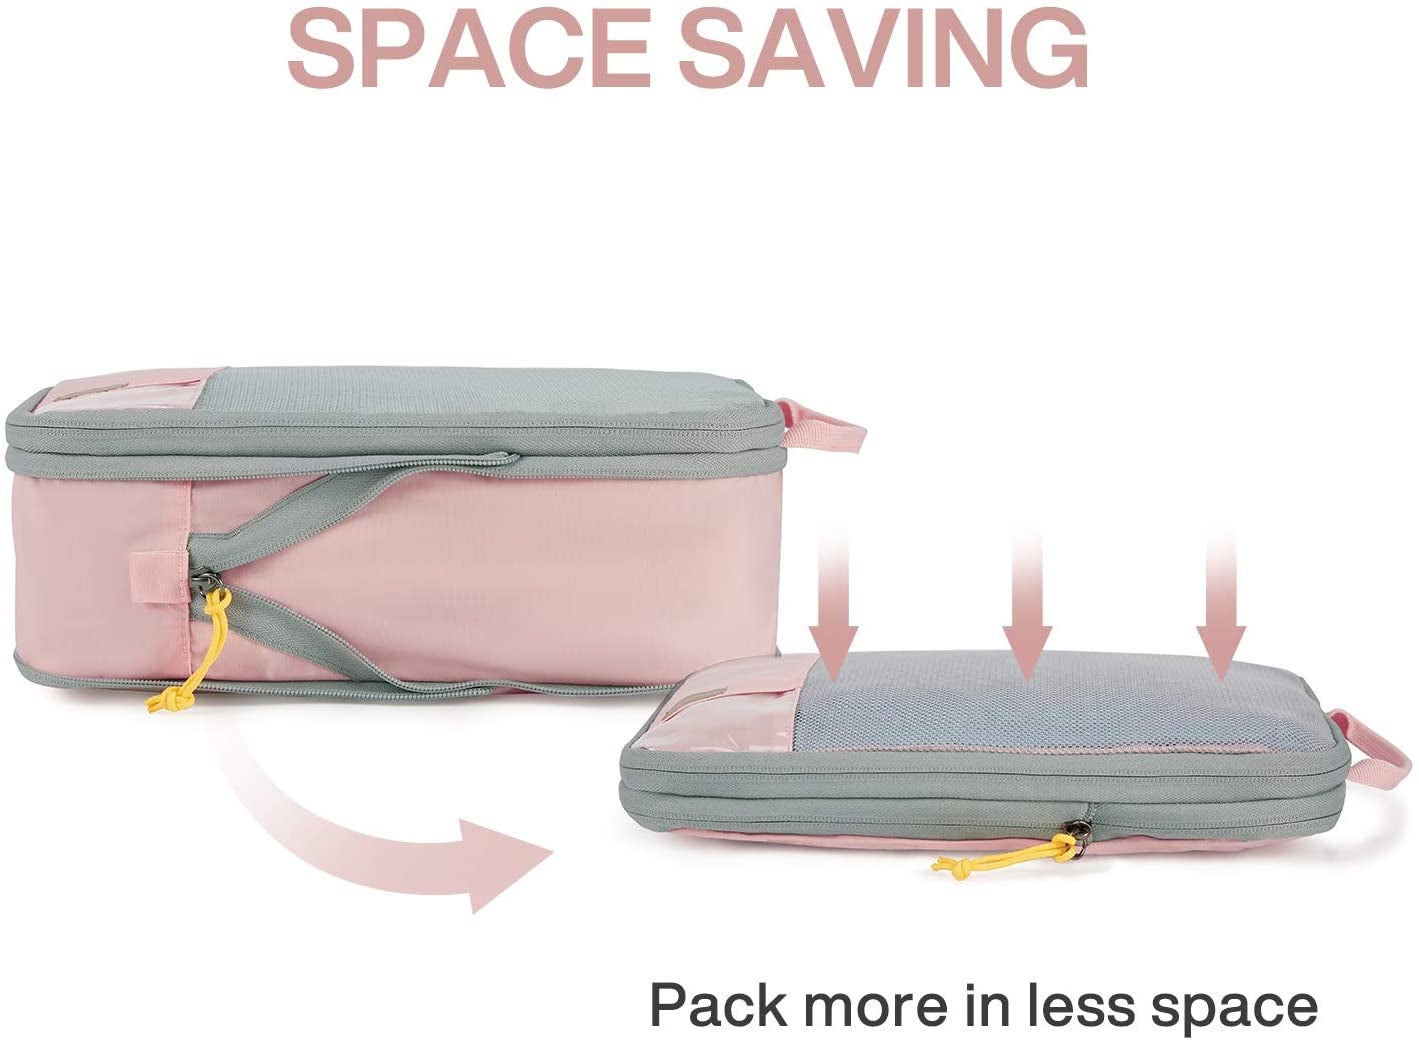 The Chestnut 12 Travel Storage Bags for Clothes - Compression Bags for Travel - No Vacuum Sacks-Save Space in Your Luggage